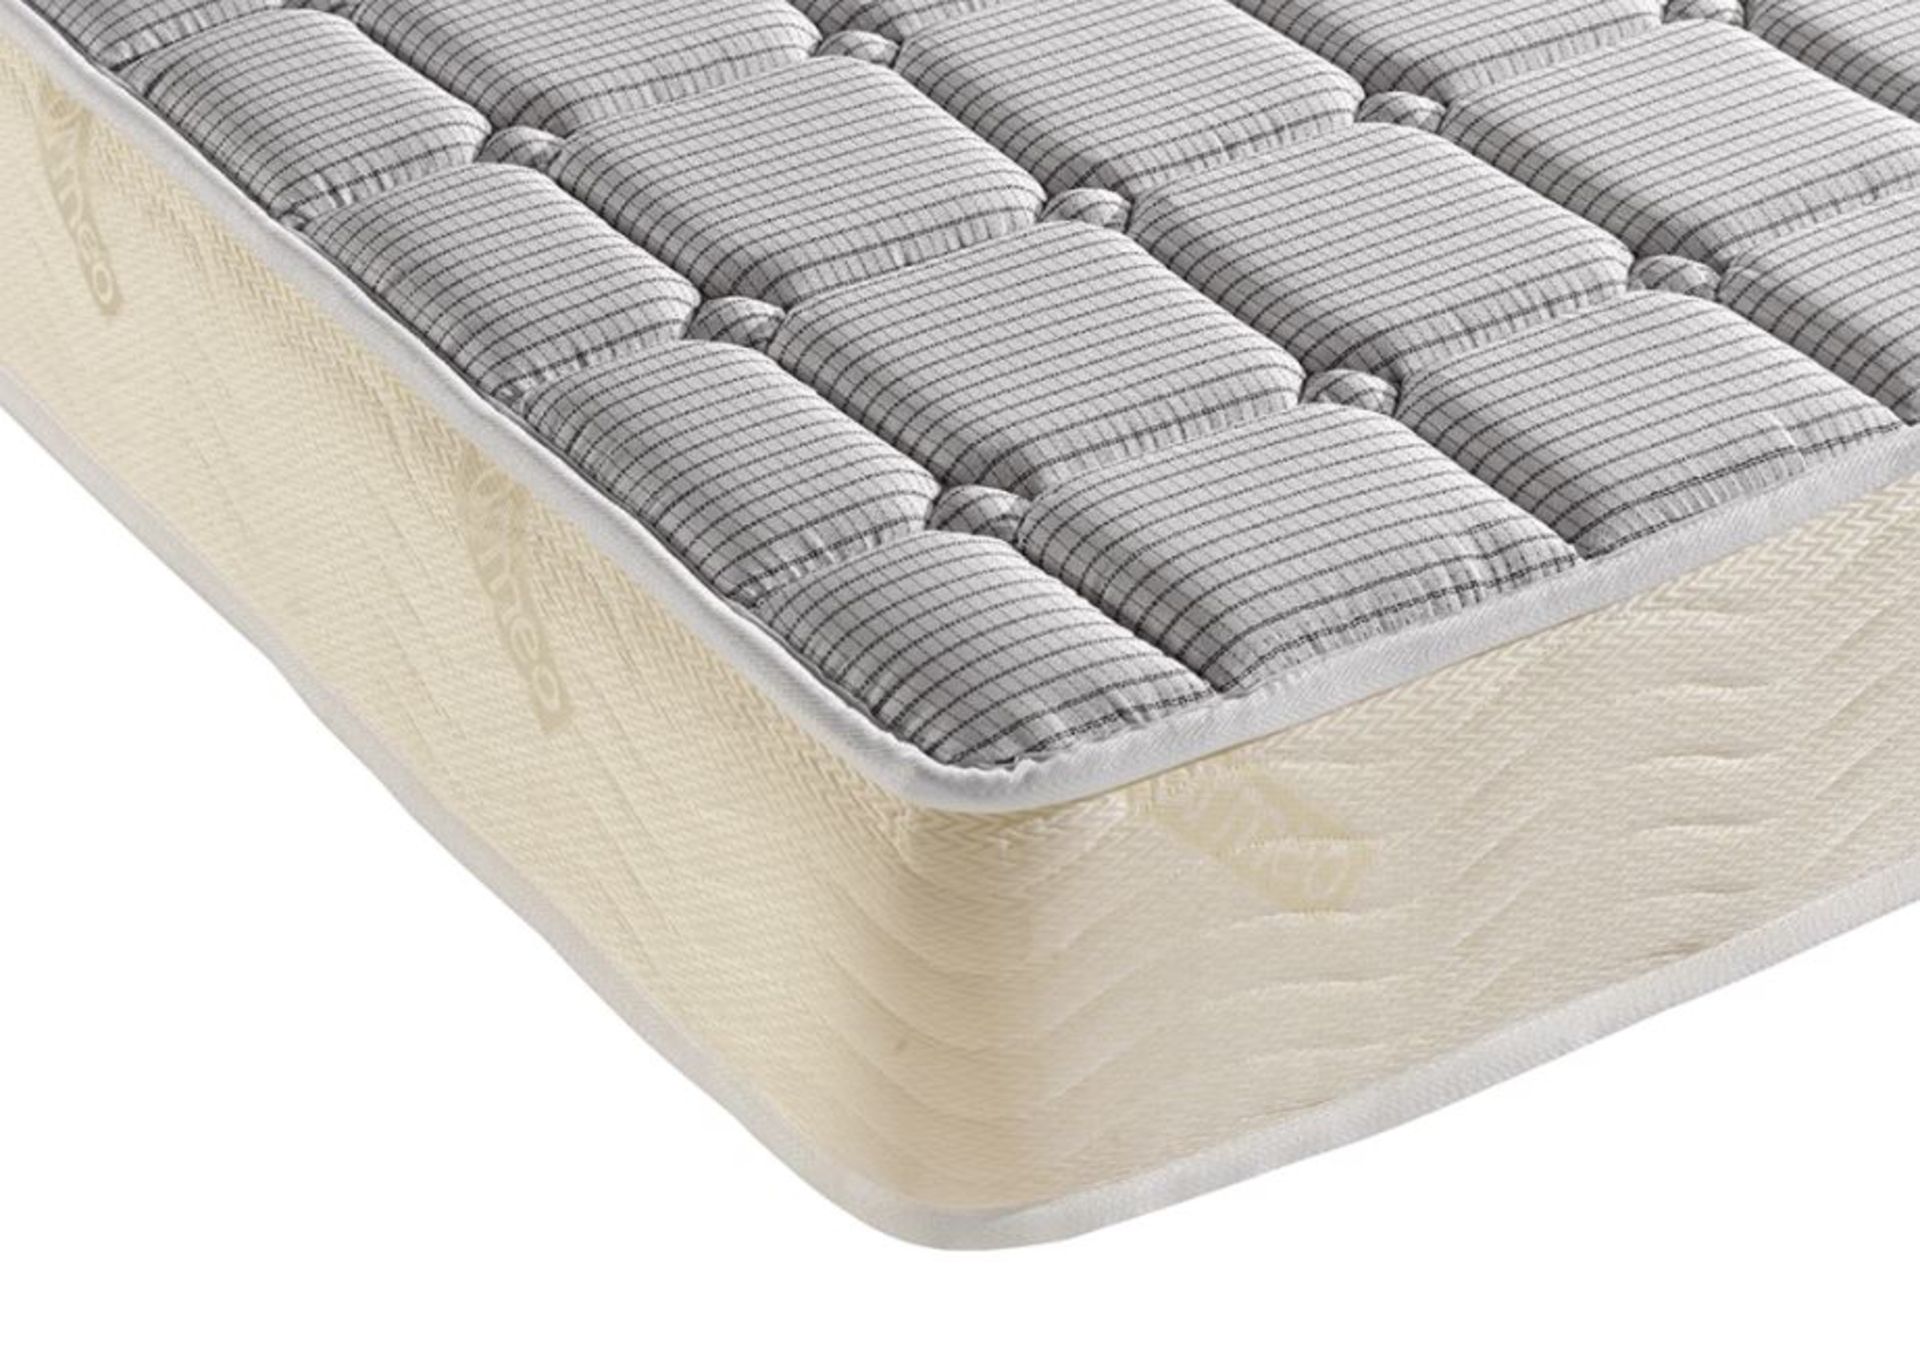 1 KING SIZE DORMEO MEMORY PLUS SPRUNG MATTRESS RRP Â£249 (PICTURES FOR ILLUSTRATION PURPOSES ONLY)